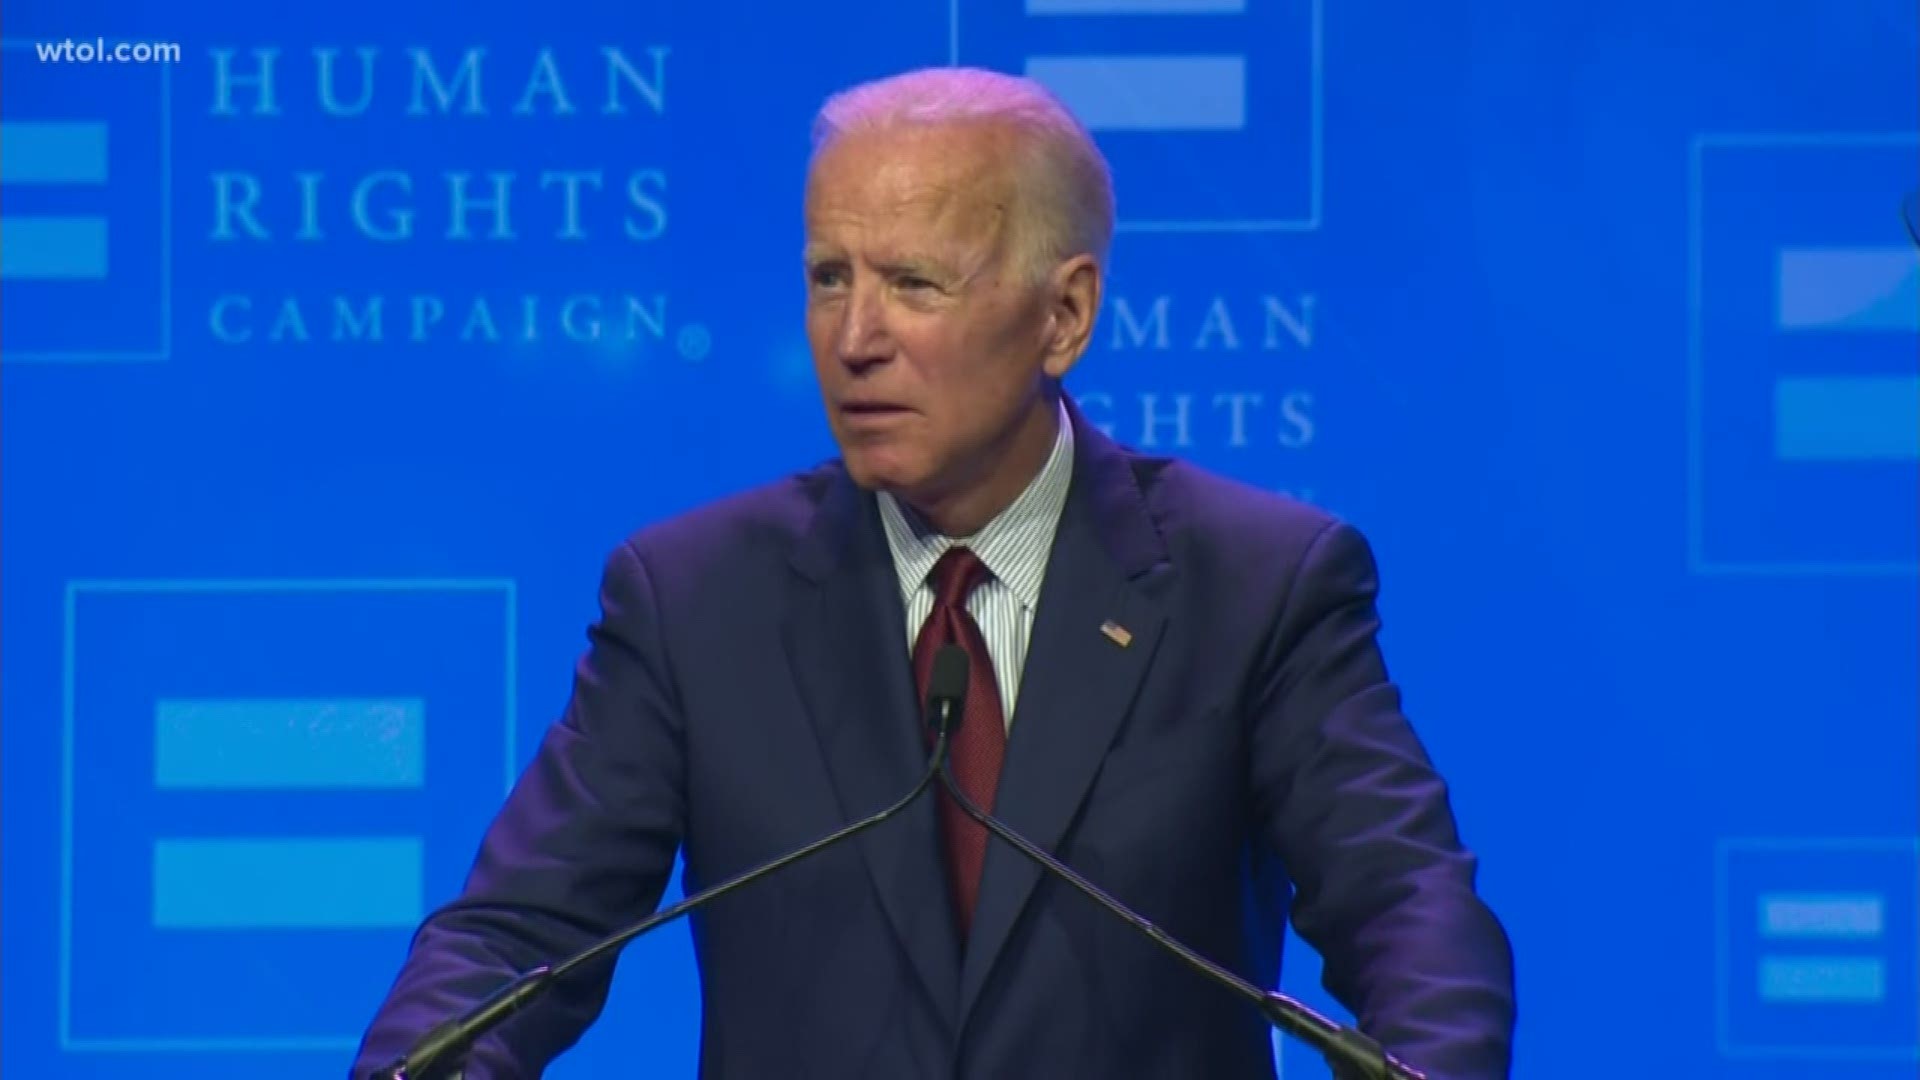 Biden said the Equality Act would be his top legislative priority at the Human's Right's Campaign's annual Ohio gala in Columbus.